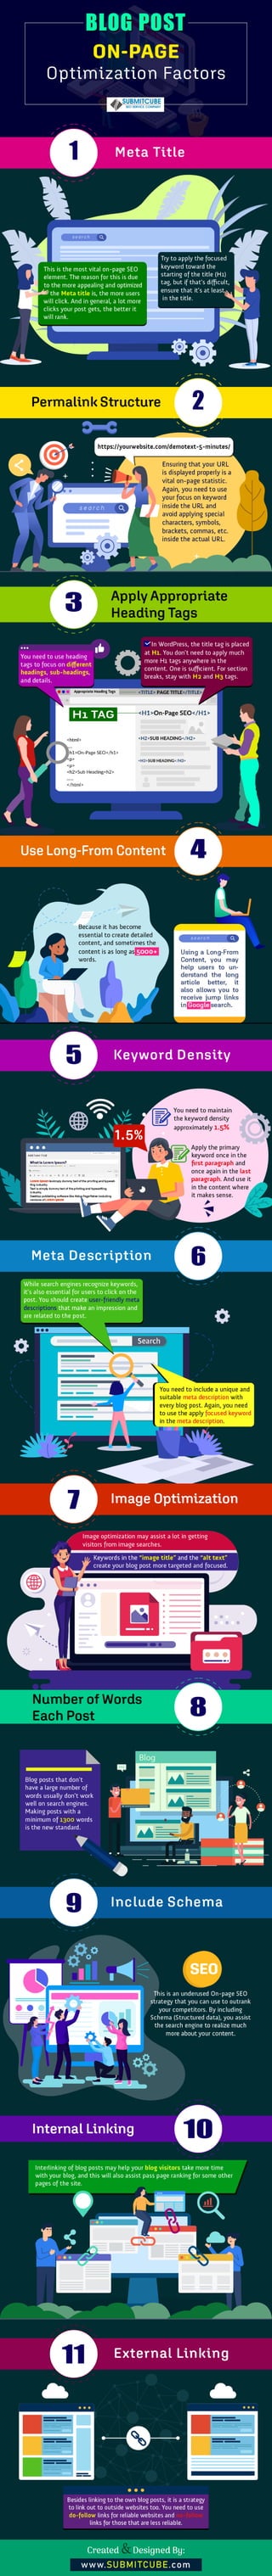 An infographic on Blog Post On-Page SEO By Submitcube